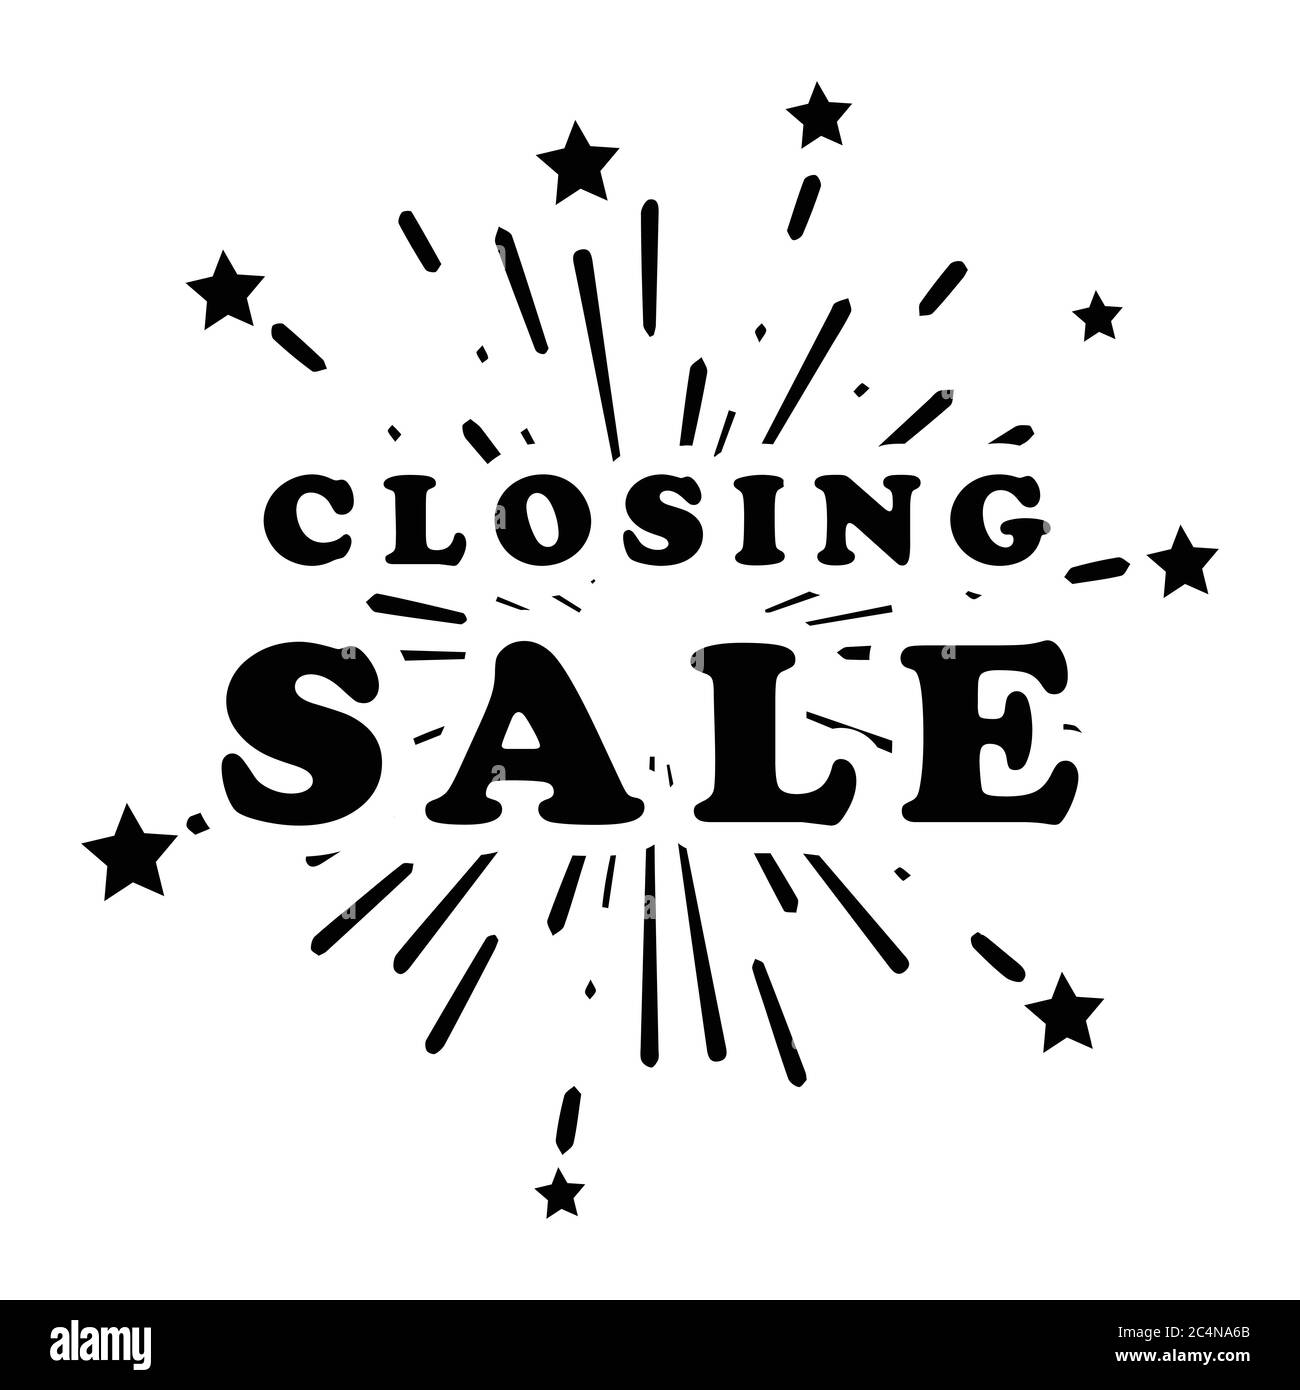 Closing Down Sale Shopping with Fireworks Stars Promotion Marketing Banner Poster. Advertising Ads for retail shop e-commerce business during close or Stock Vector